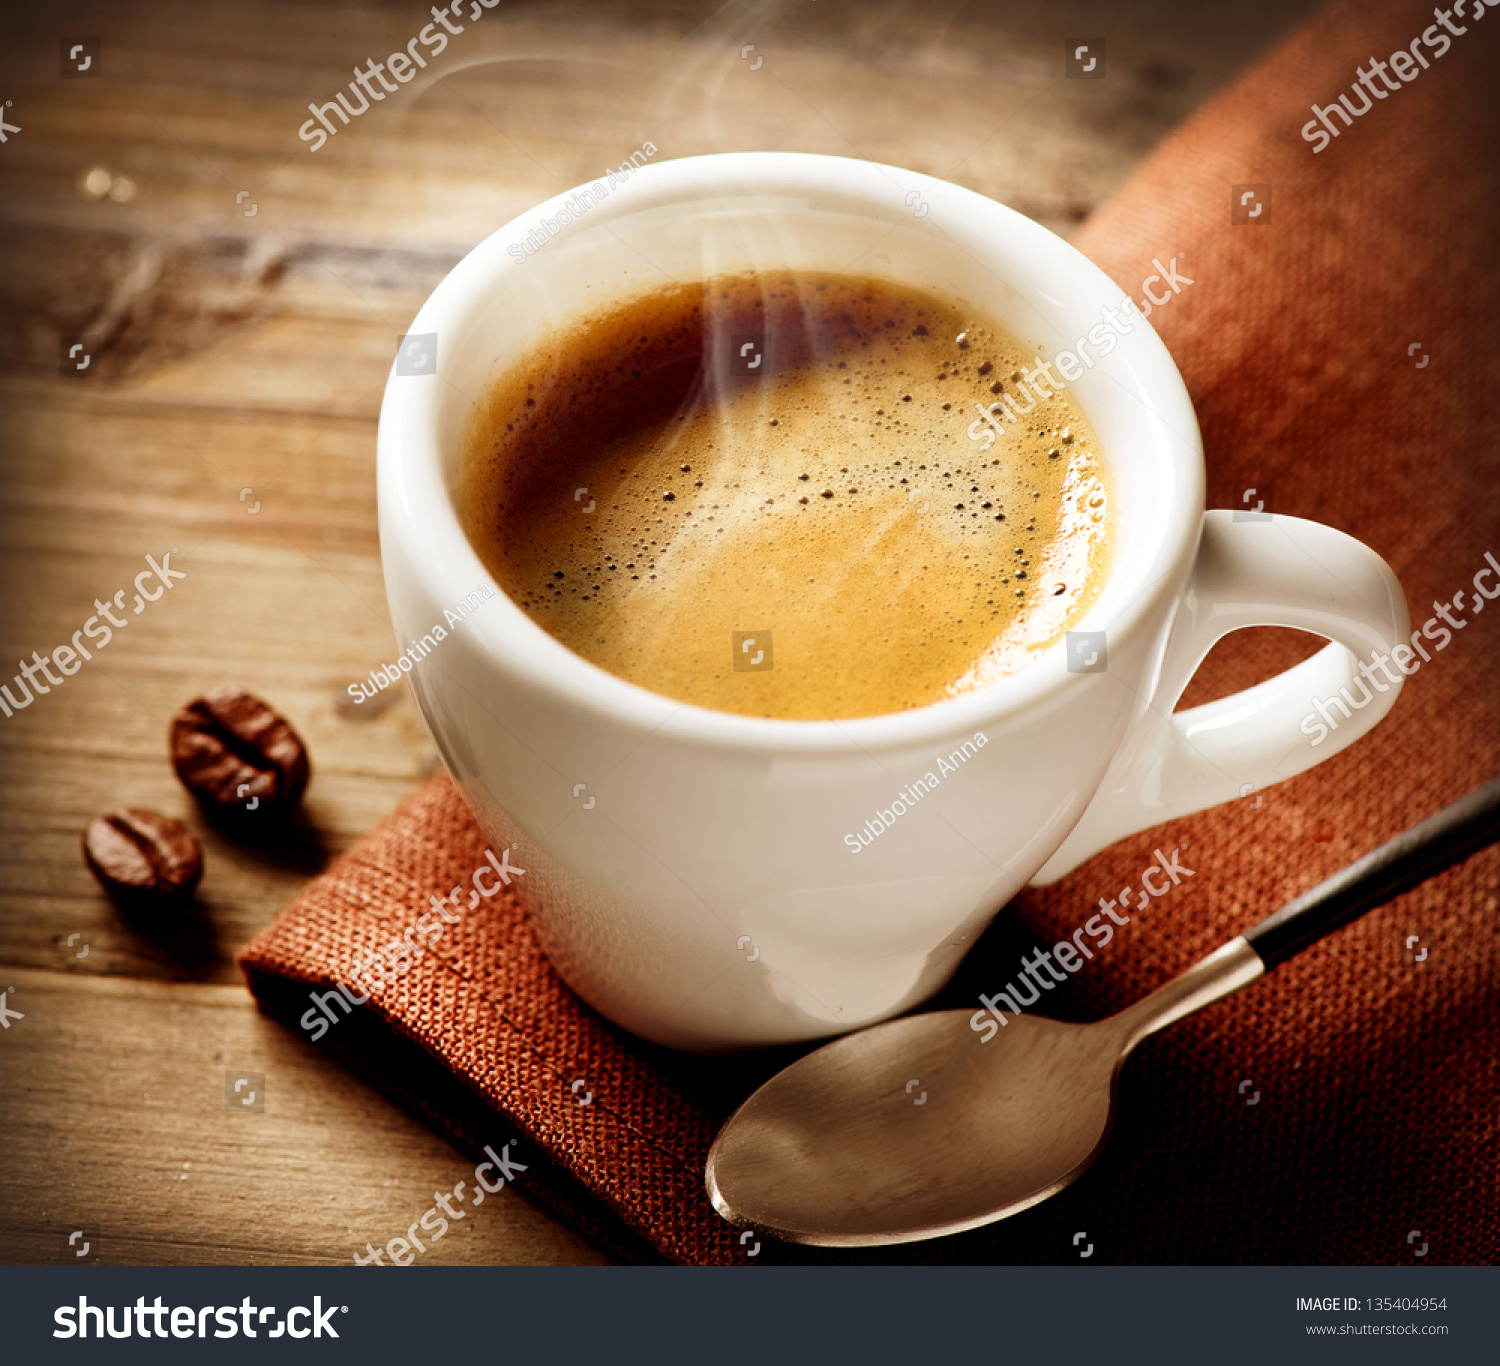 stock-photo-coffee-espresso-cup-of-coffee-135404954